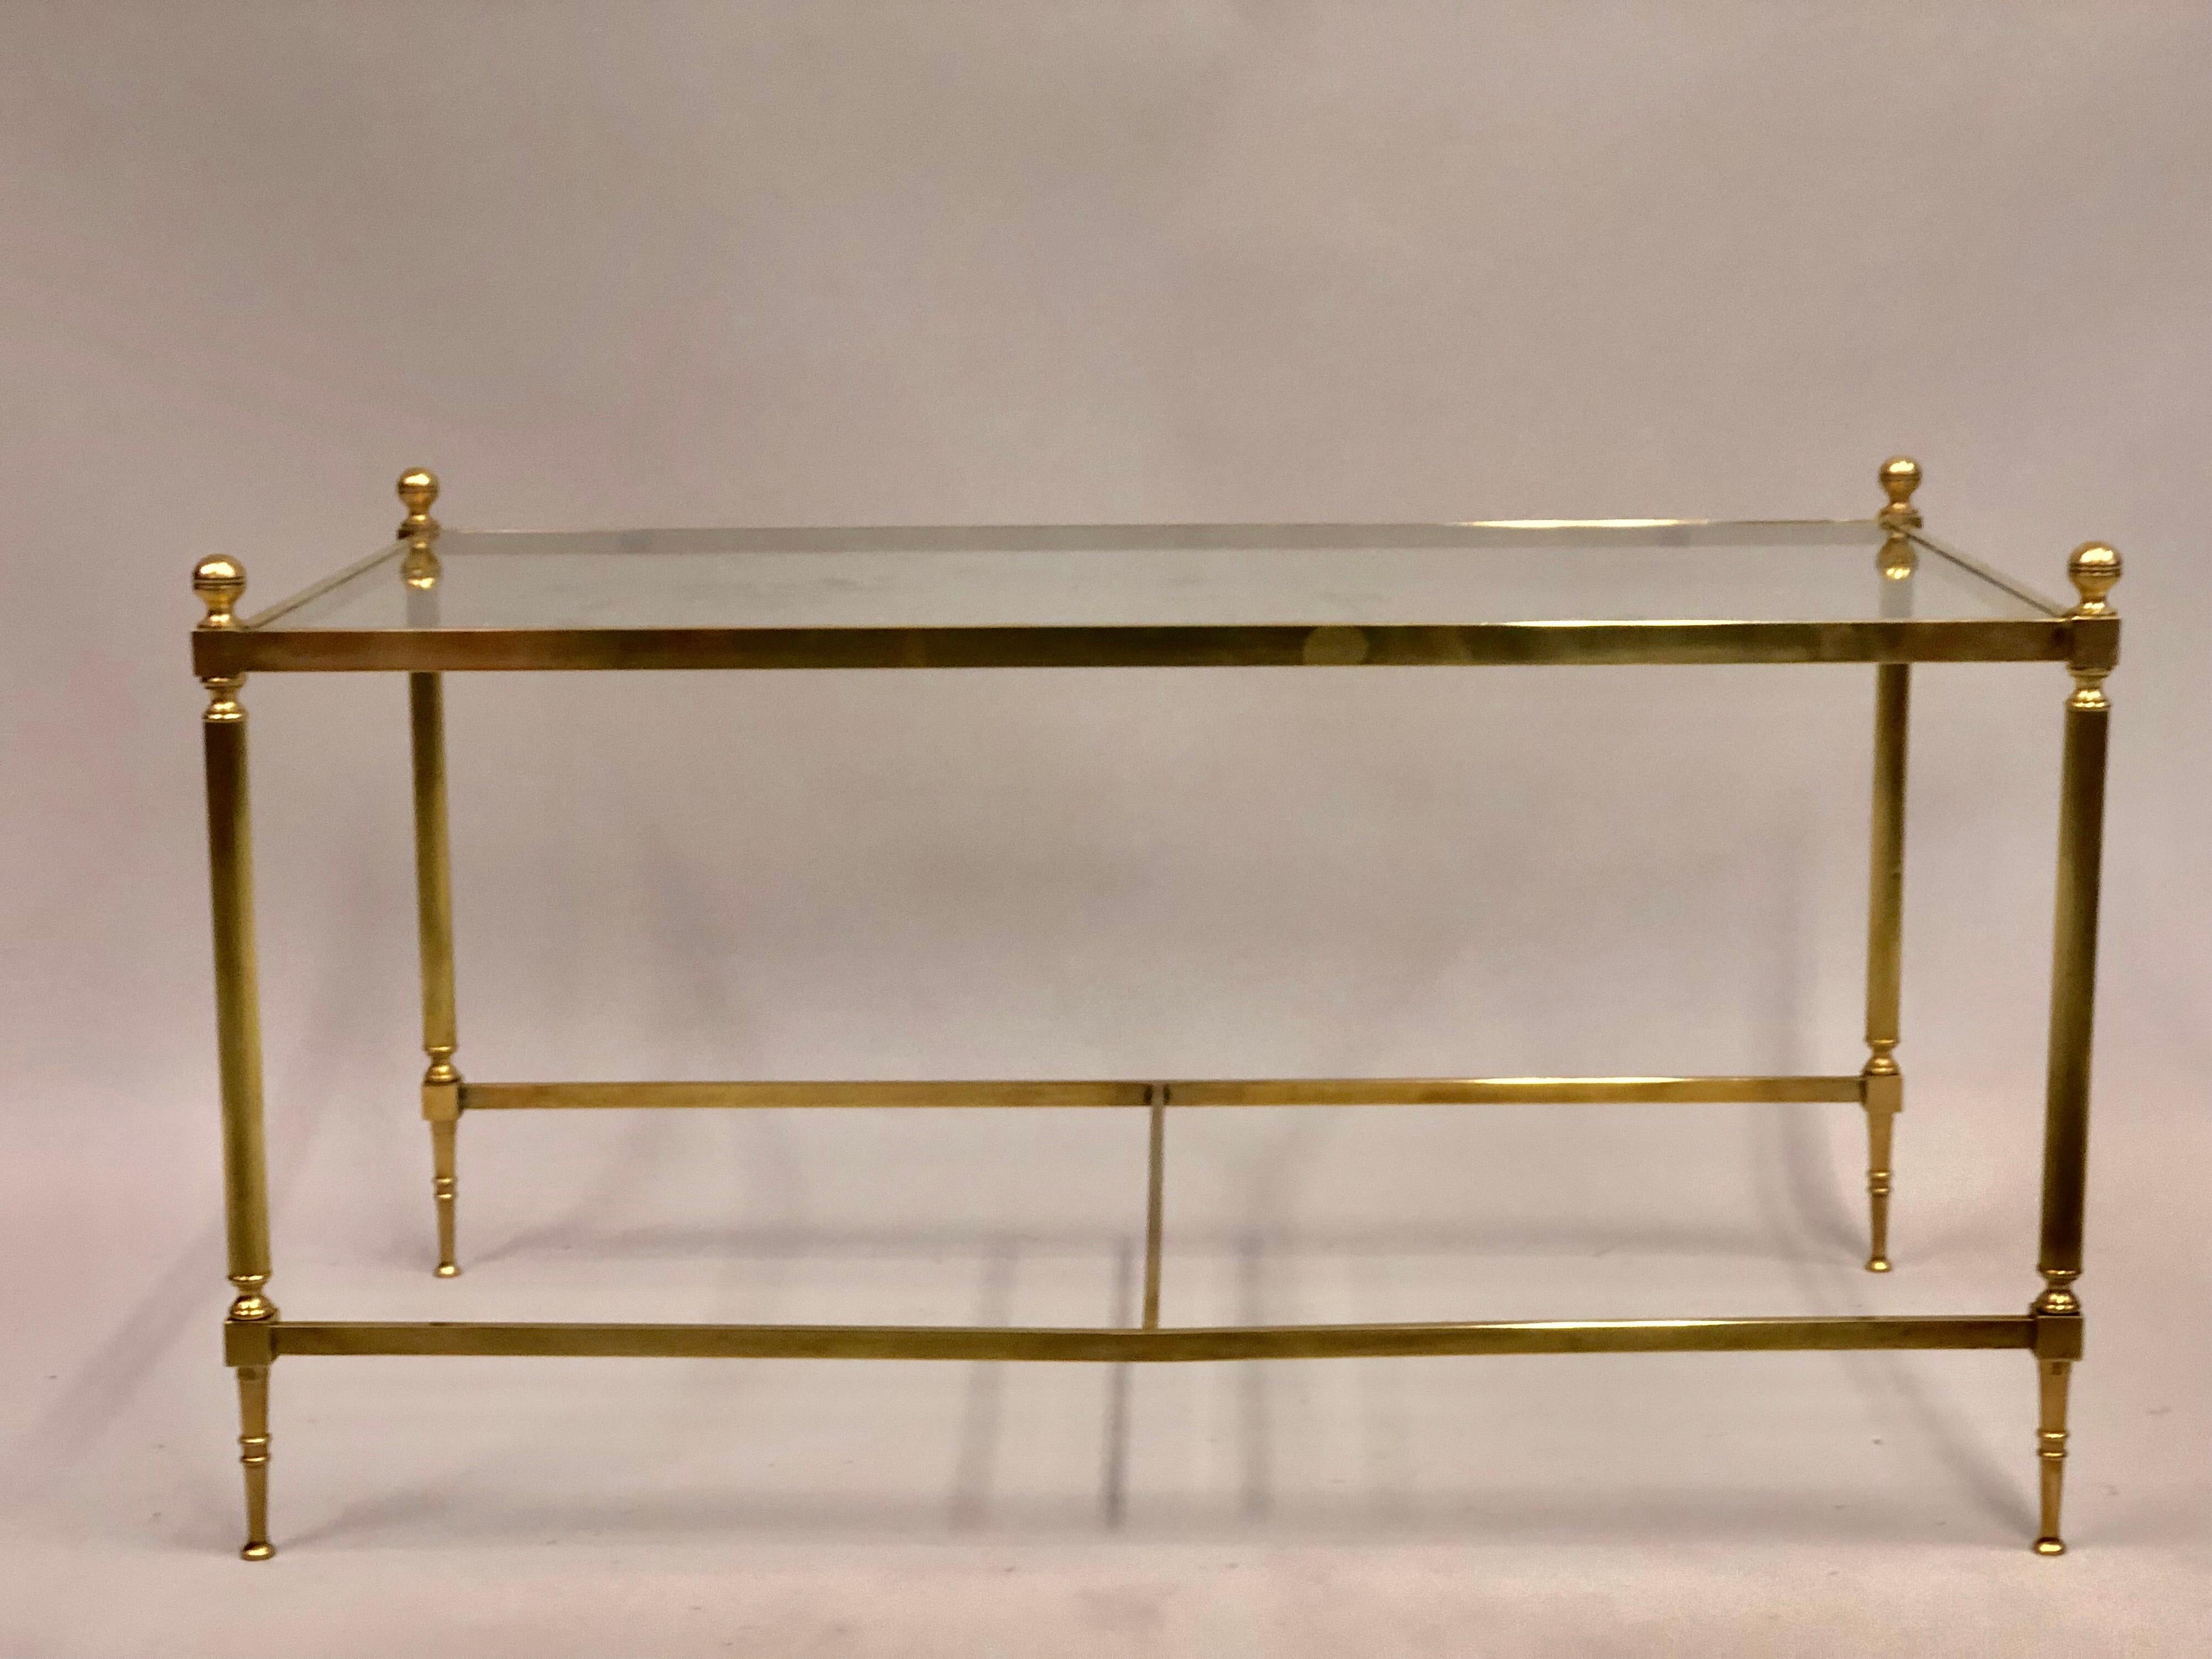 A delicate and refined French Mid-Century Modern Neoclassical cocktail table in solid brass with inset glass top by Maison Jansen circa 1950.  The table features sensuous fluted and tapered legs that terminate with thin pointed feet and dramatic